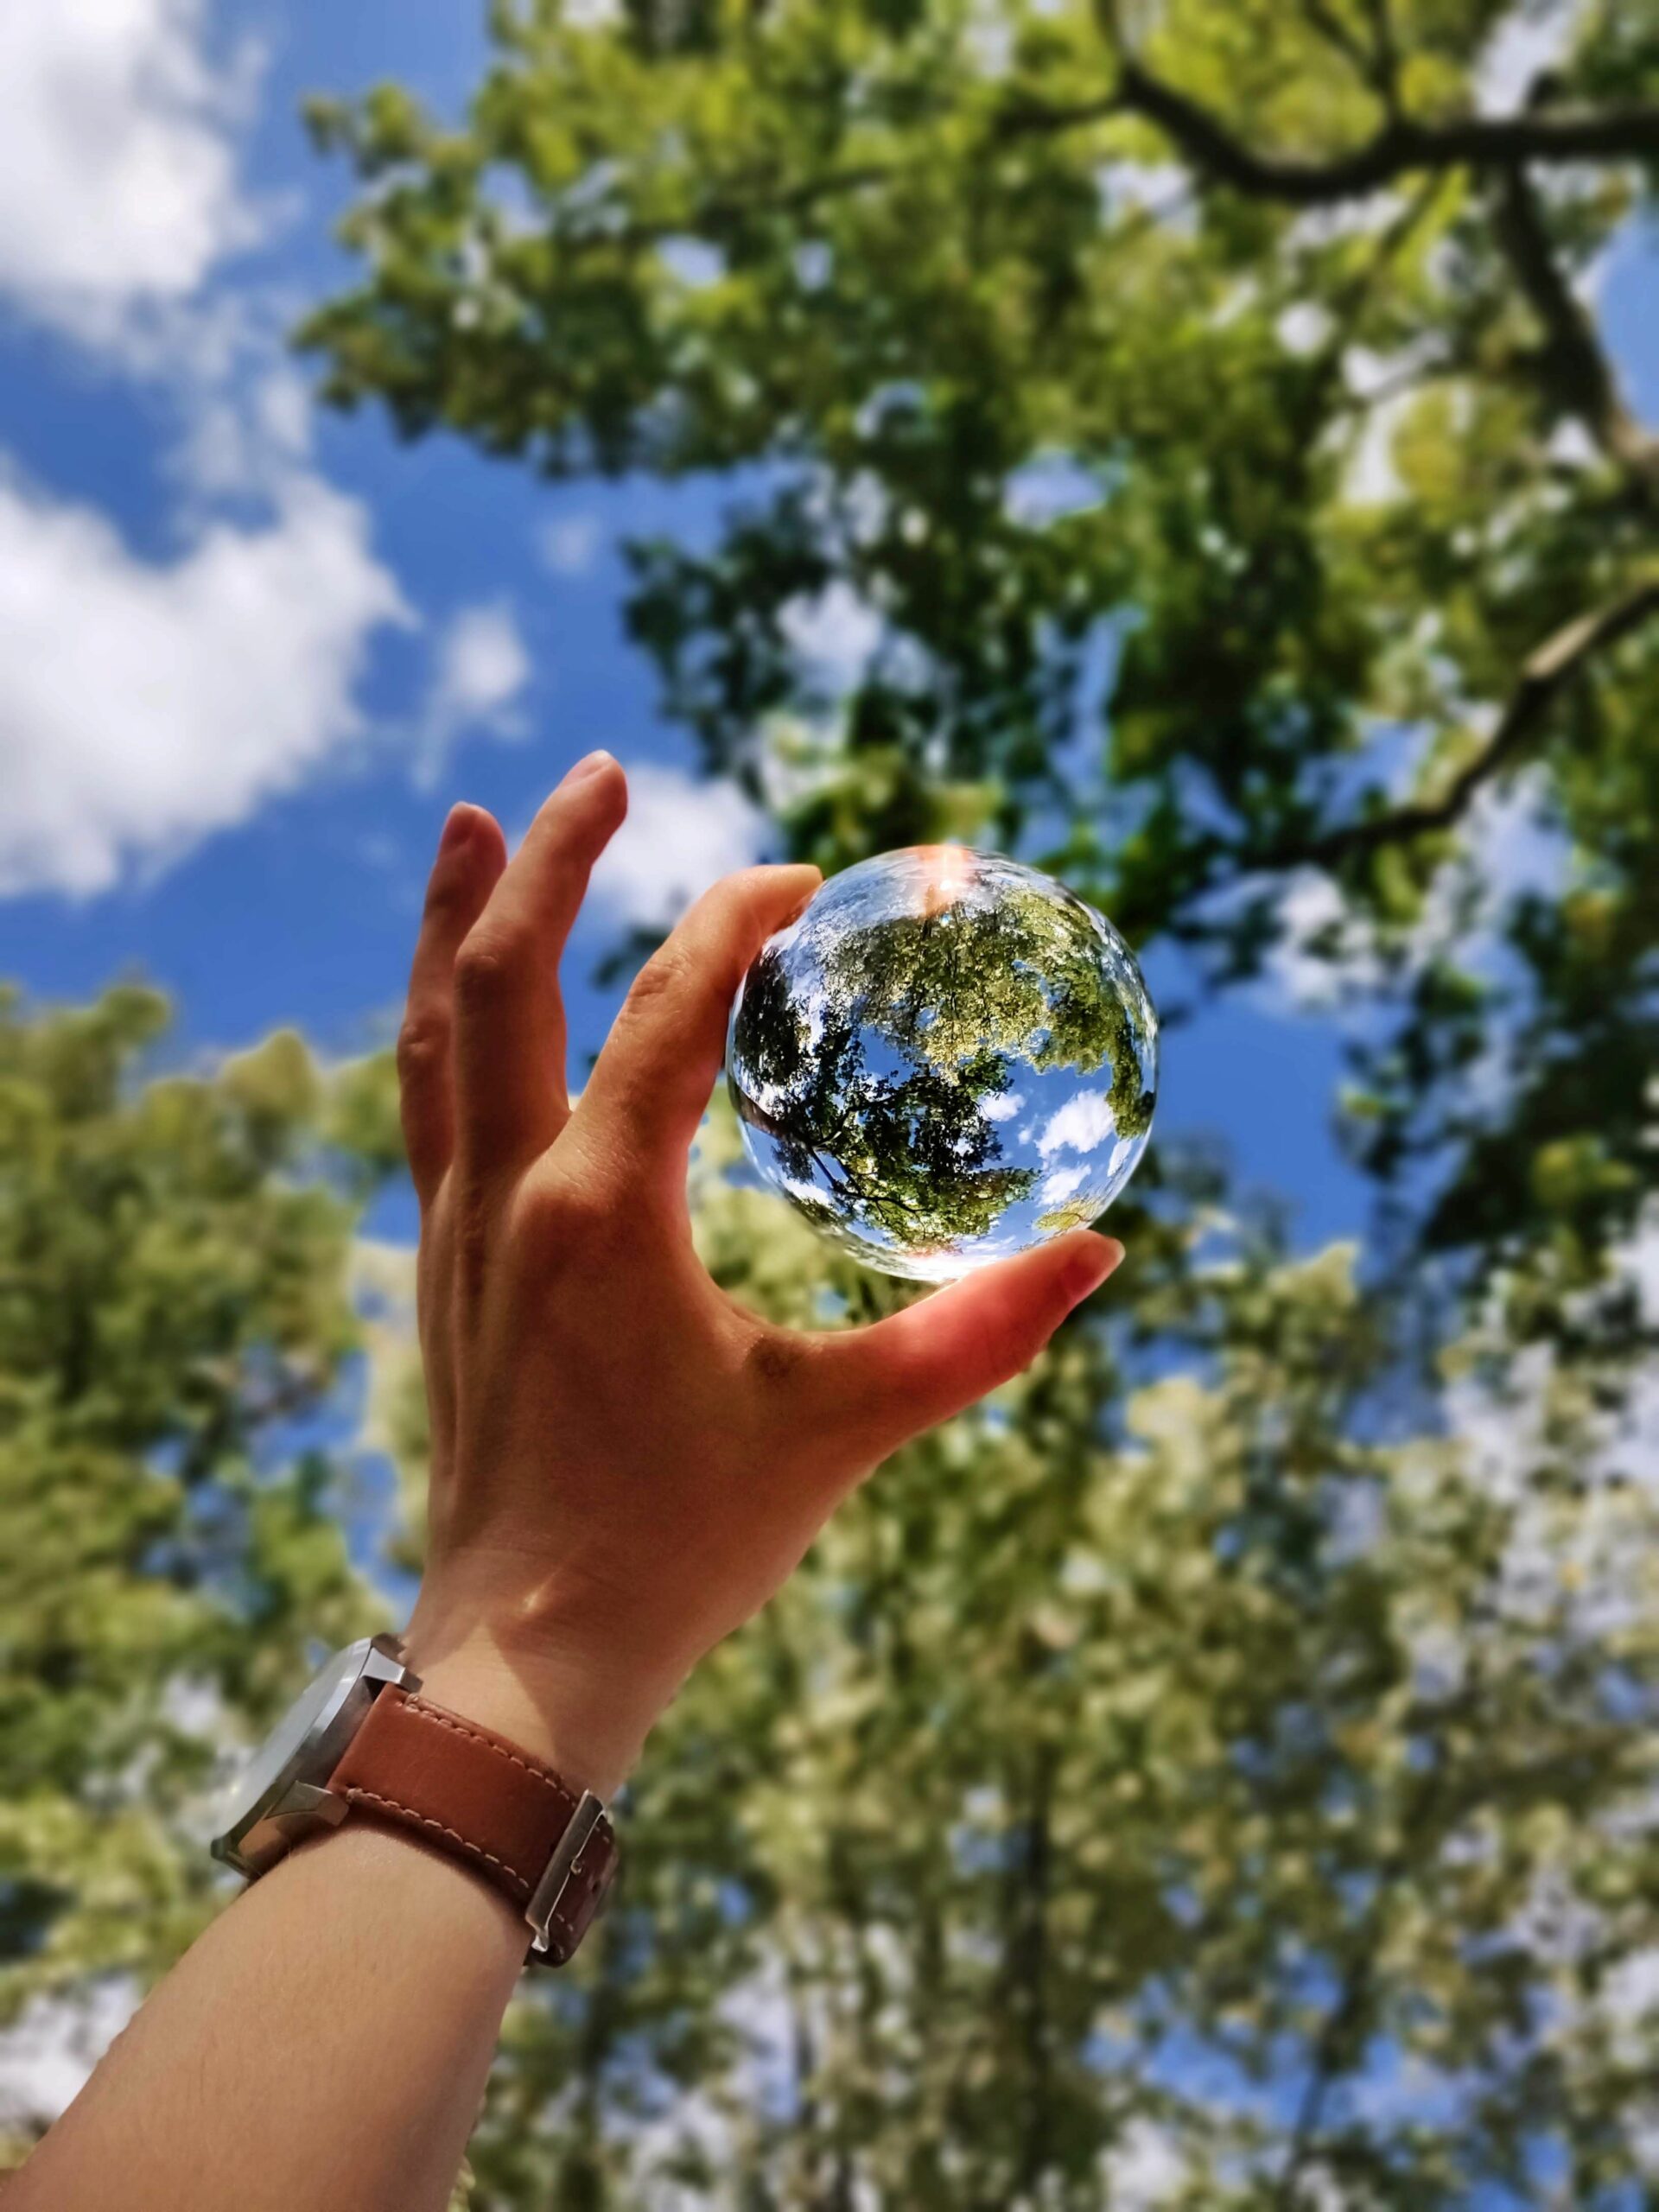 An image of a person holding a glass ball in the sky, with the trees and sky reflecting to resemble the earth.